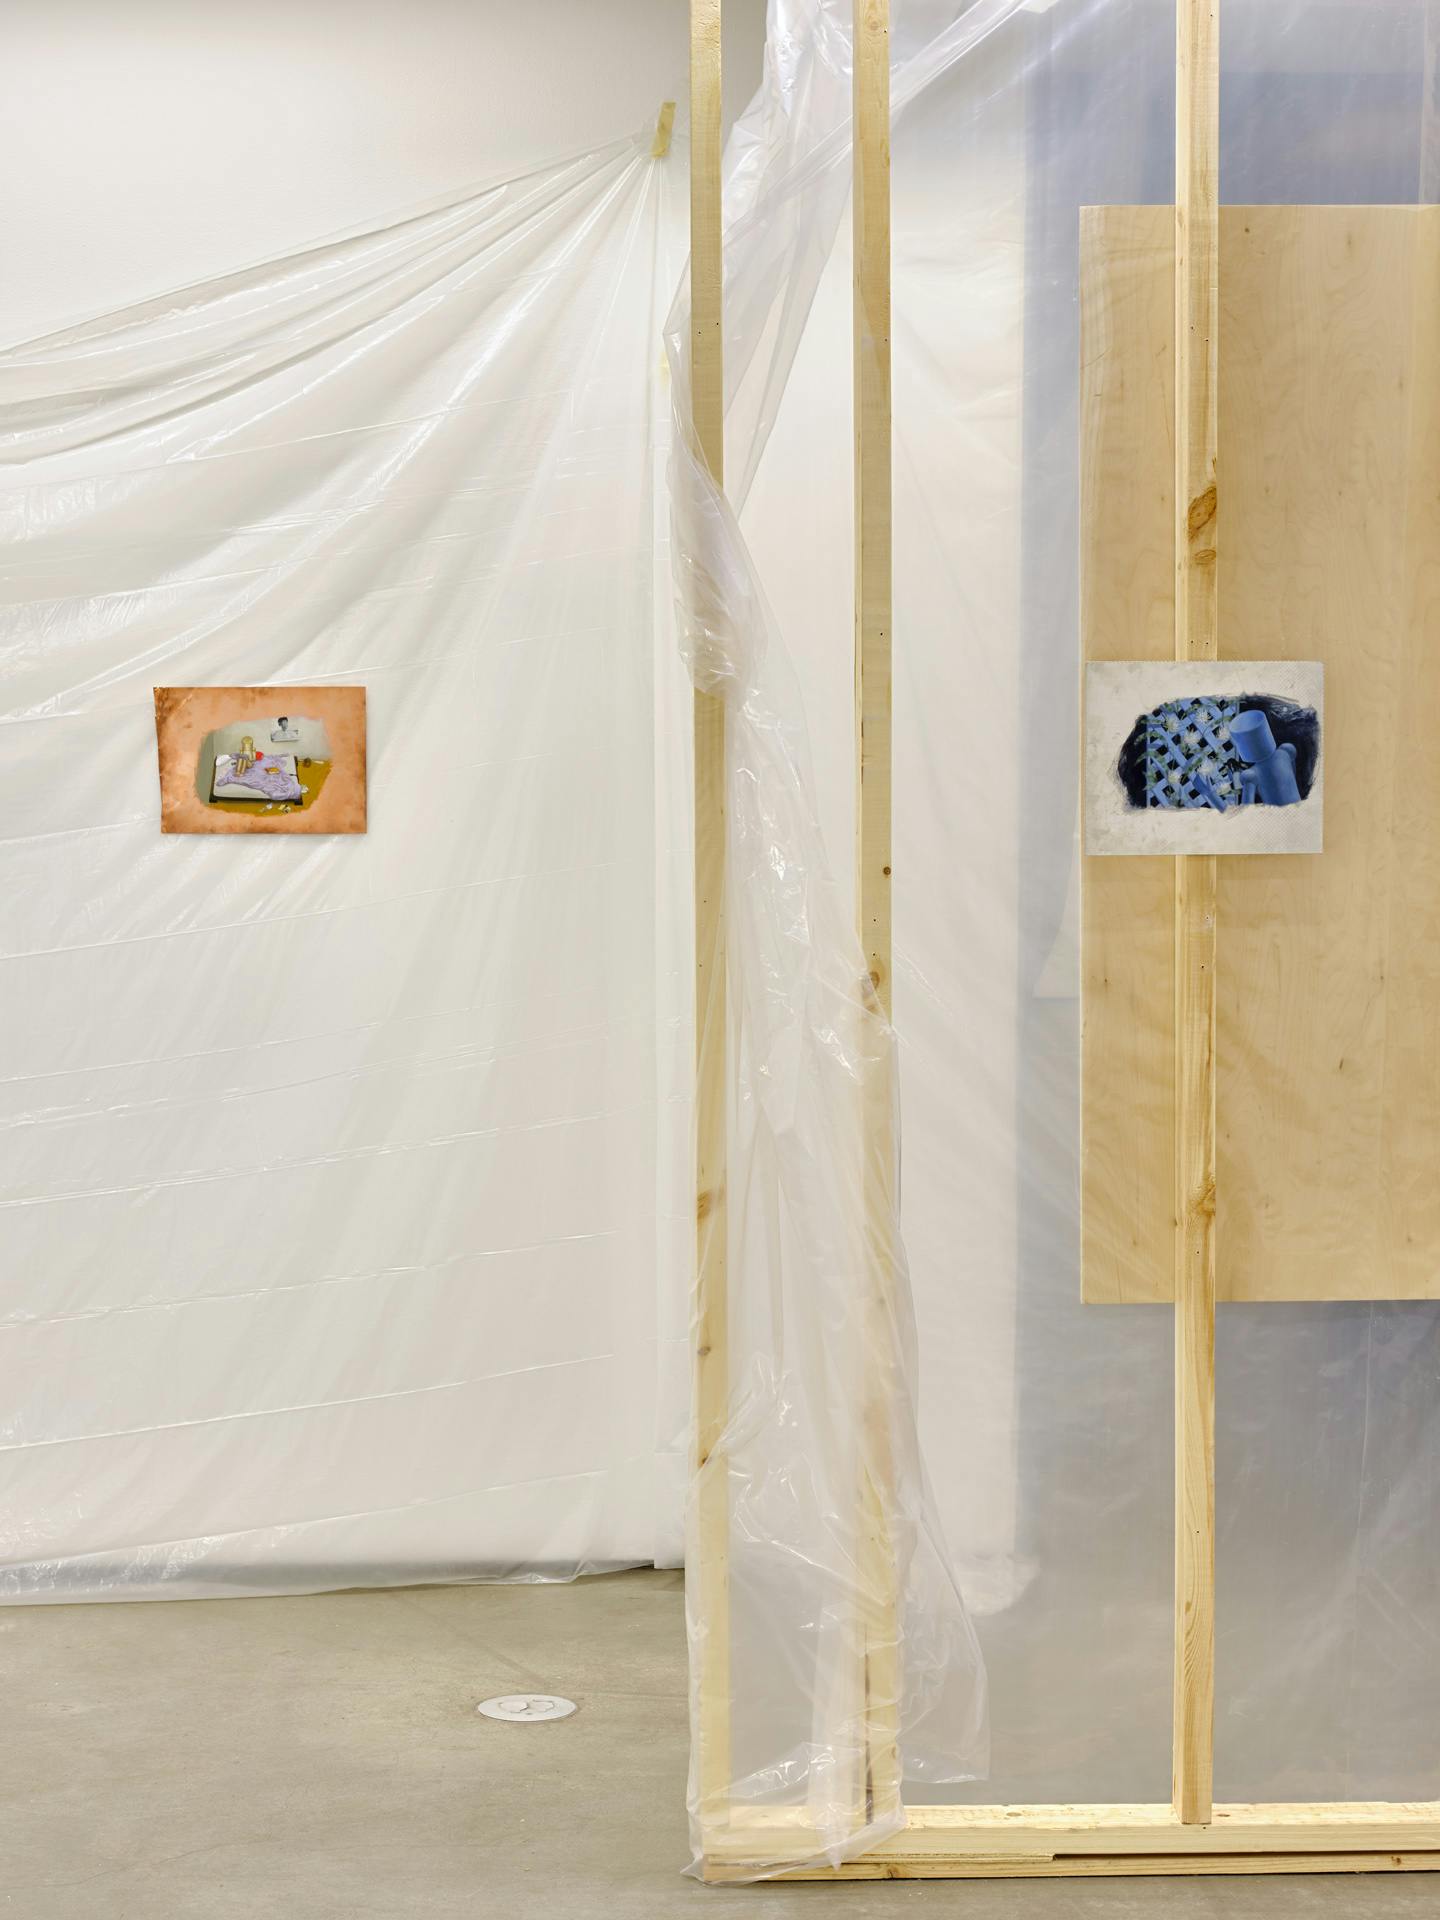 A small copper painting hangs on a white gallery wall draped in translucent plastic sheets. To the left a small blue painting on a metal sheer hangs on an unfinished wooden wall structure.